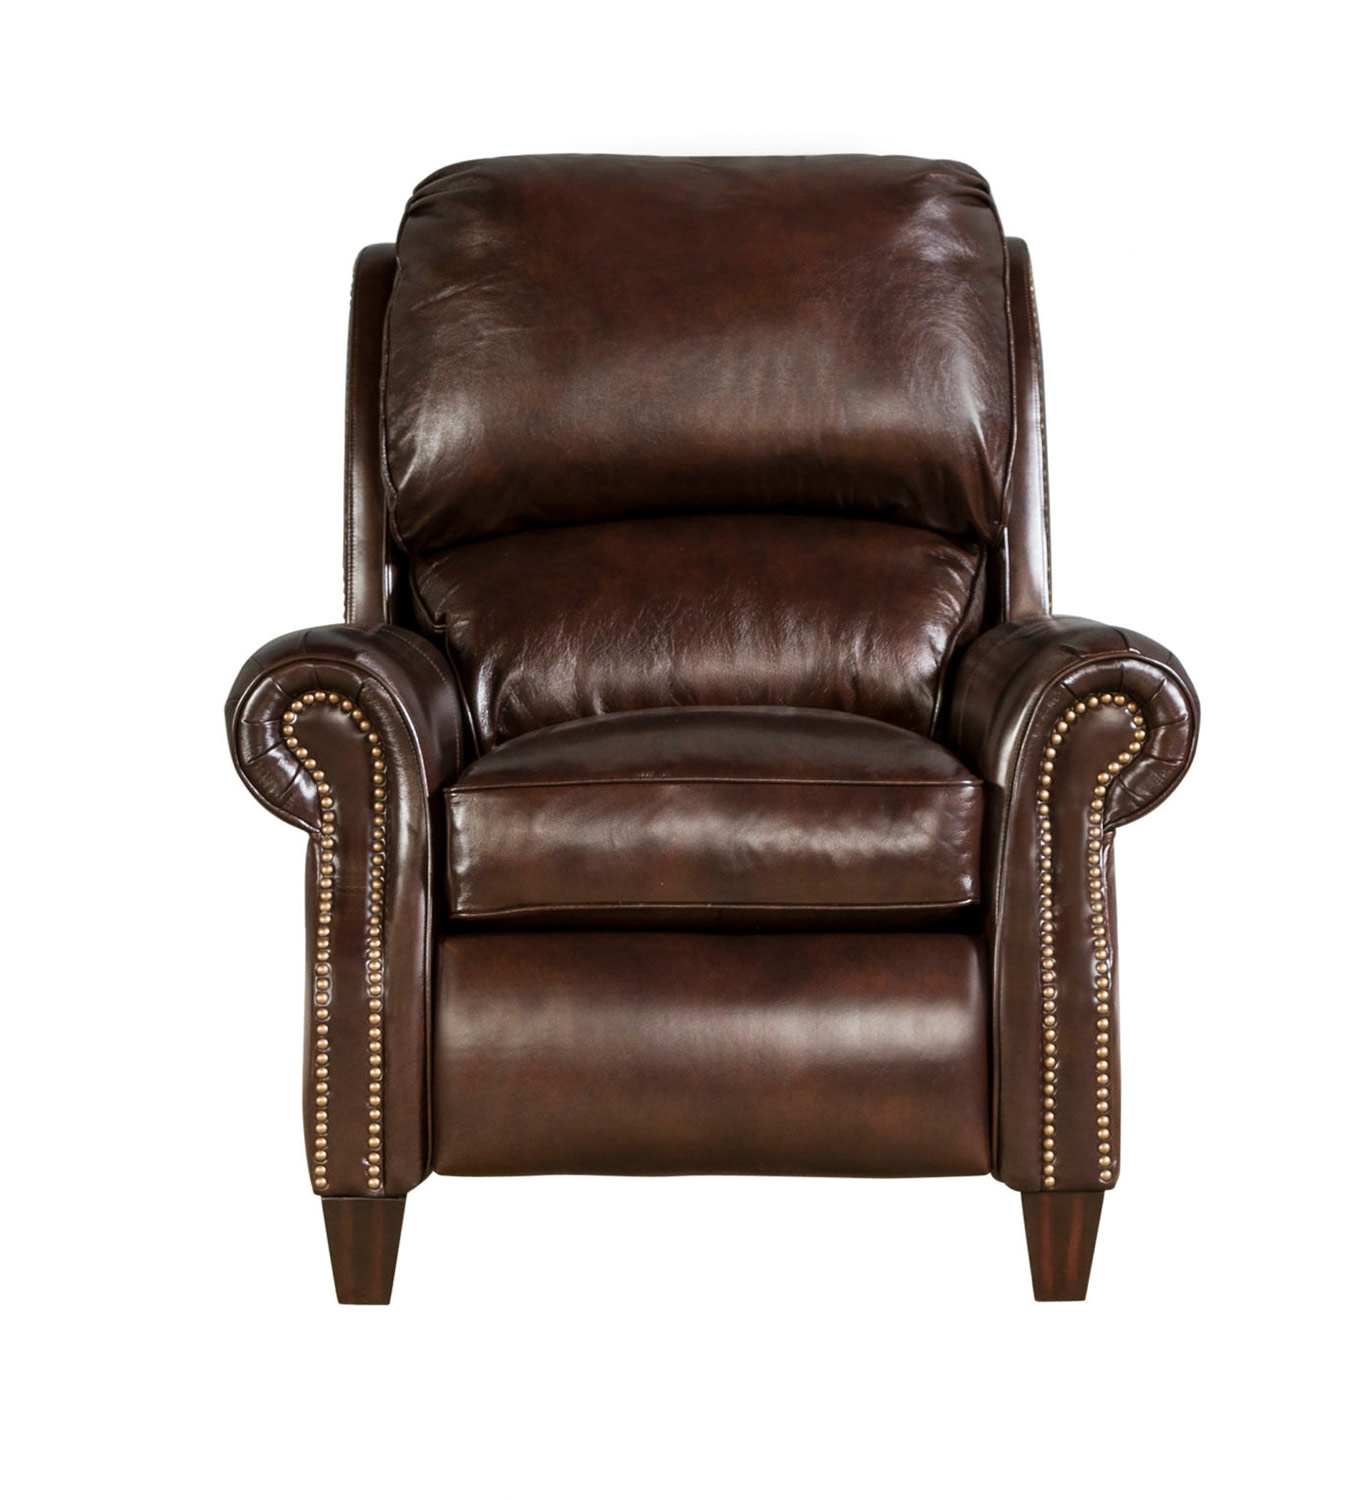 Barcalounger Churchill Recliner Chair - Double Fudge/All Leather